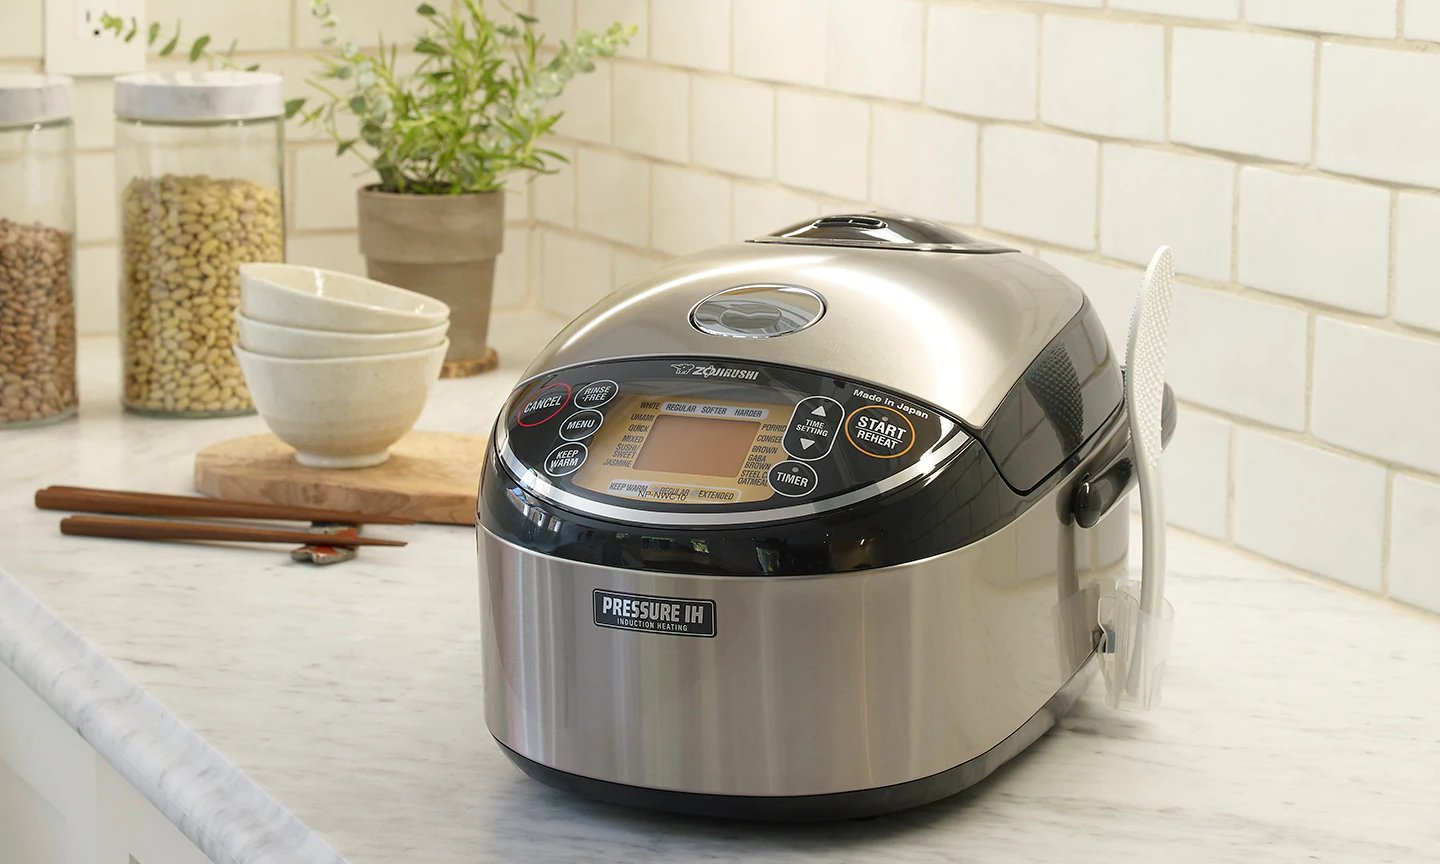 The Best Zojirushi Rice Cookers for Every Home Cook